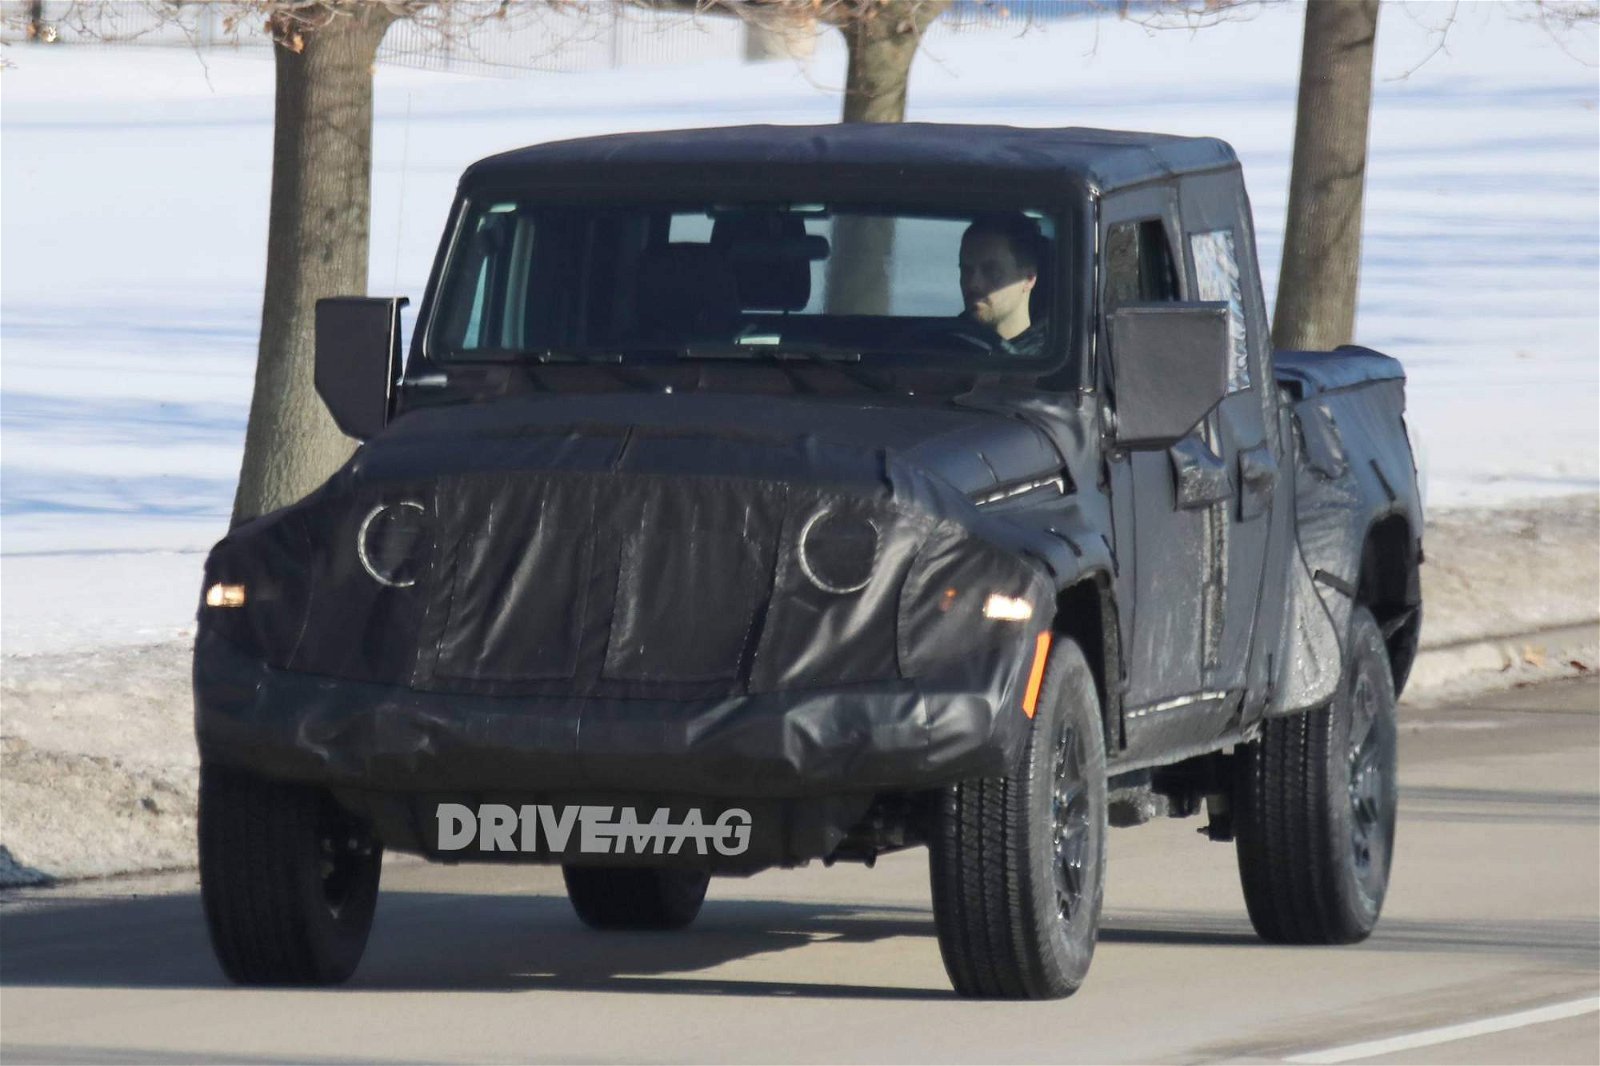 Wrangler-based 2019 Jeep Scrambler pickup takes its bed out for a drive |  DriveMag Cars